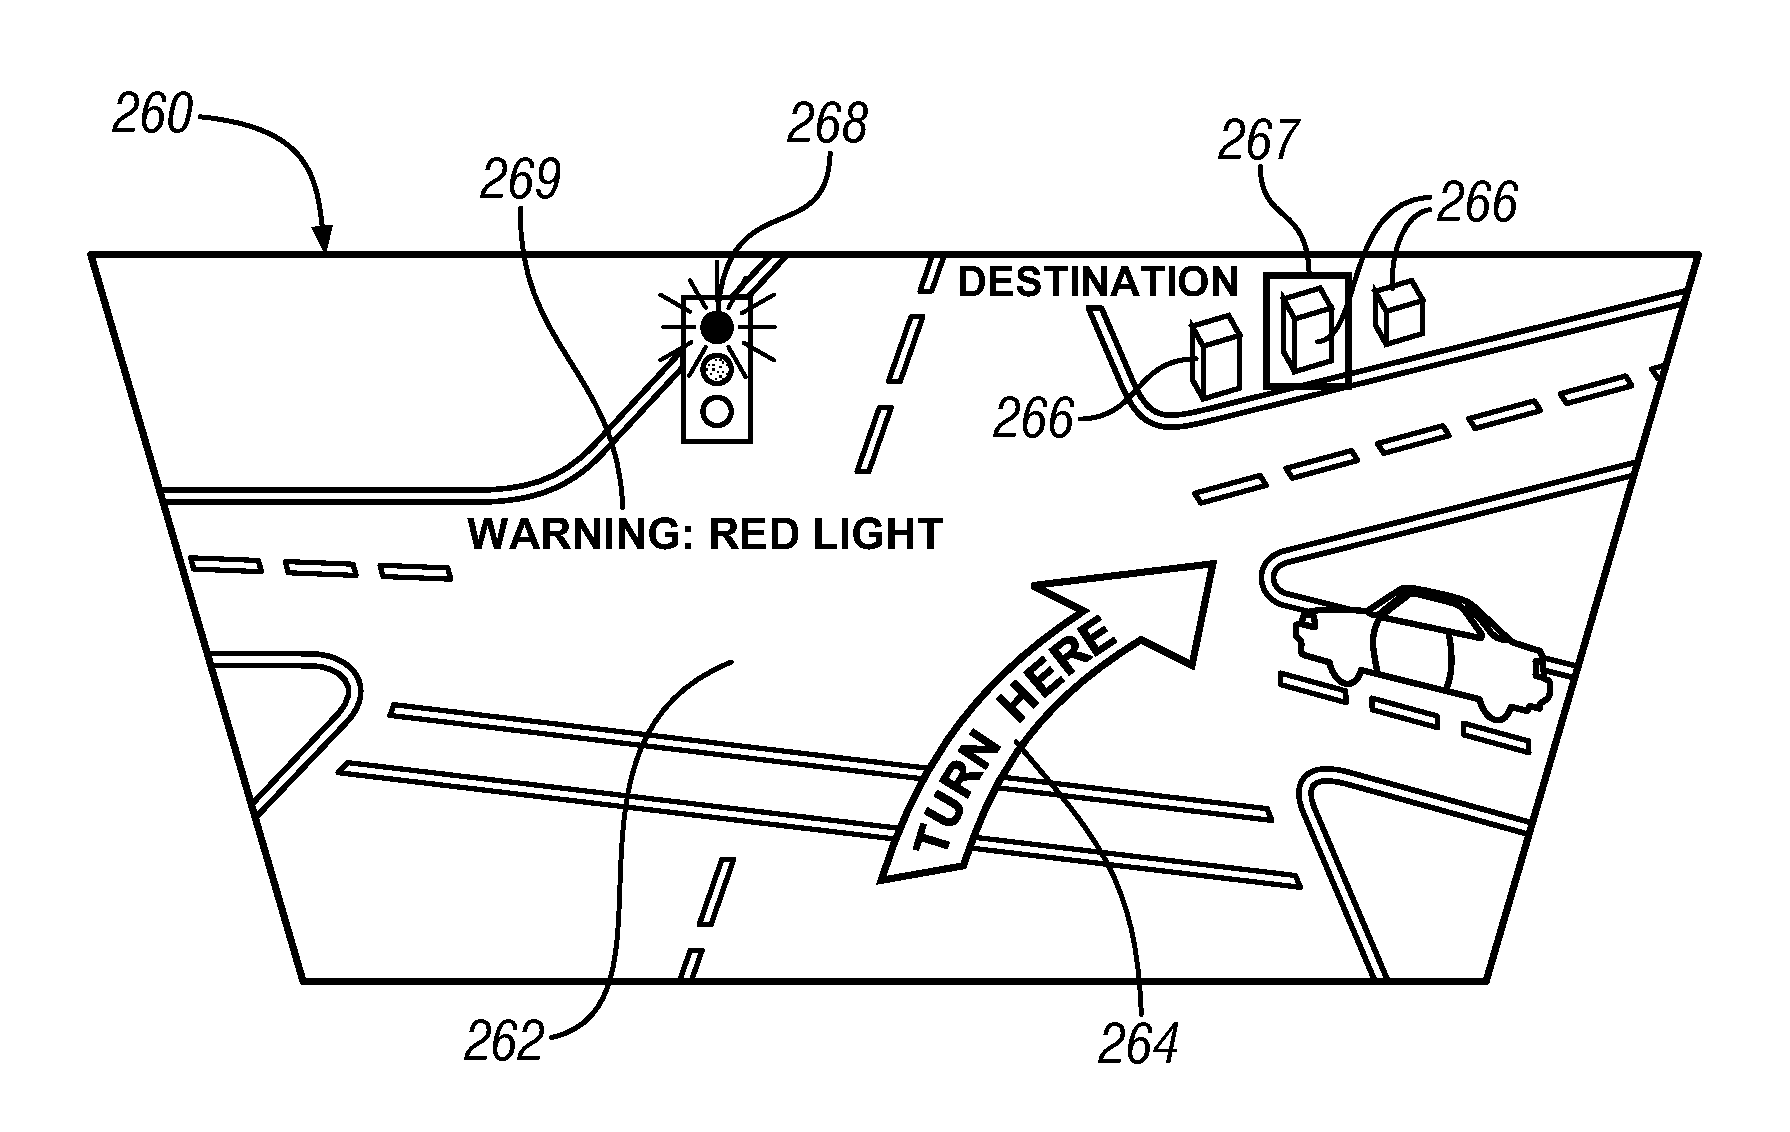 Point of interest location marking on full windshield head-up display